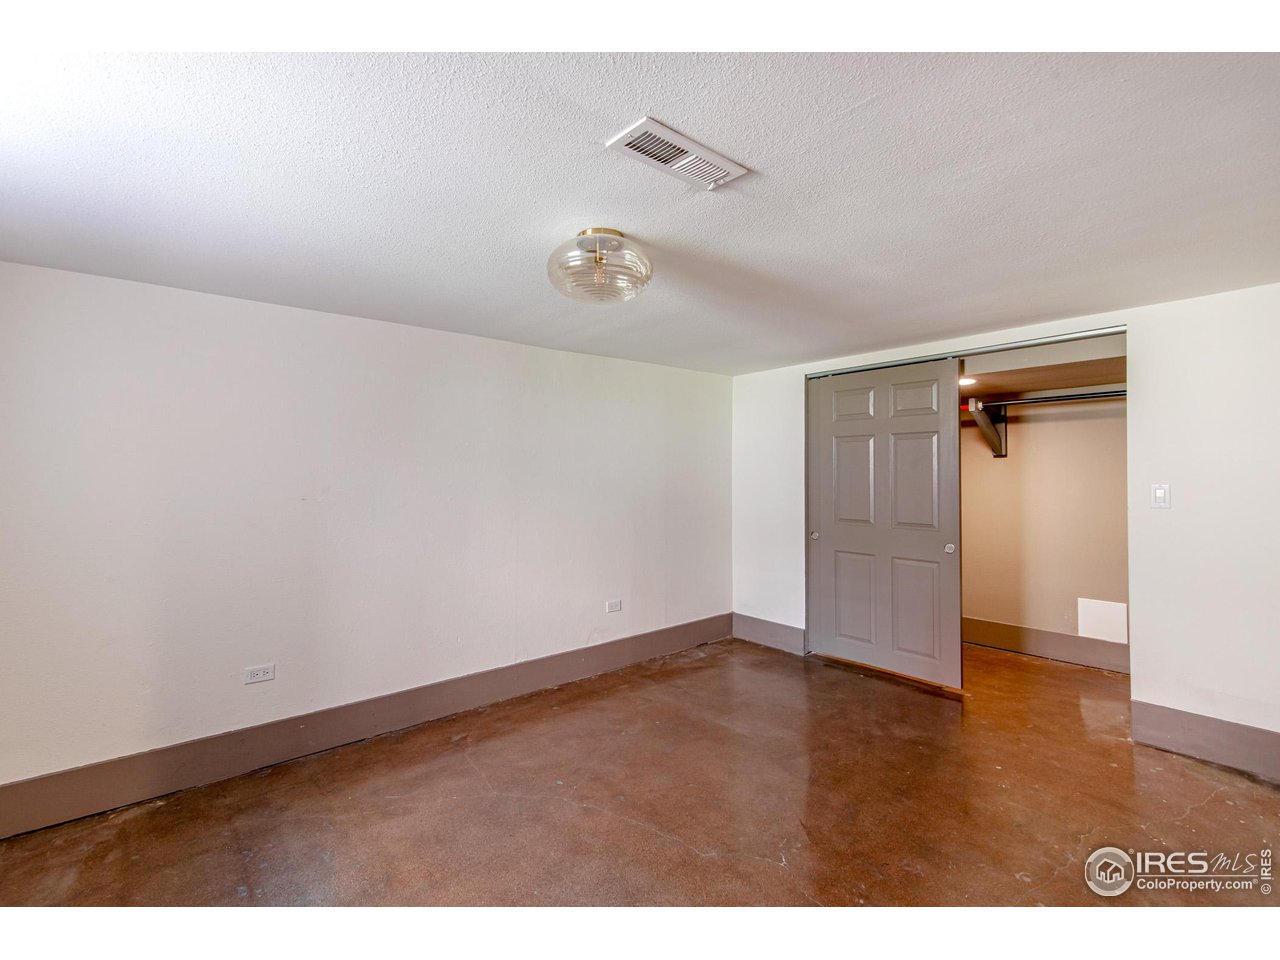 Lower level large BR with concrete floors